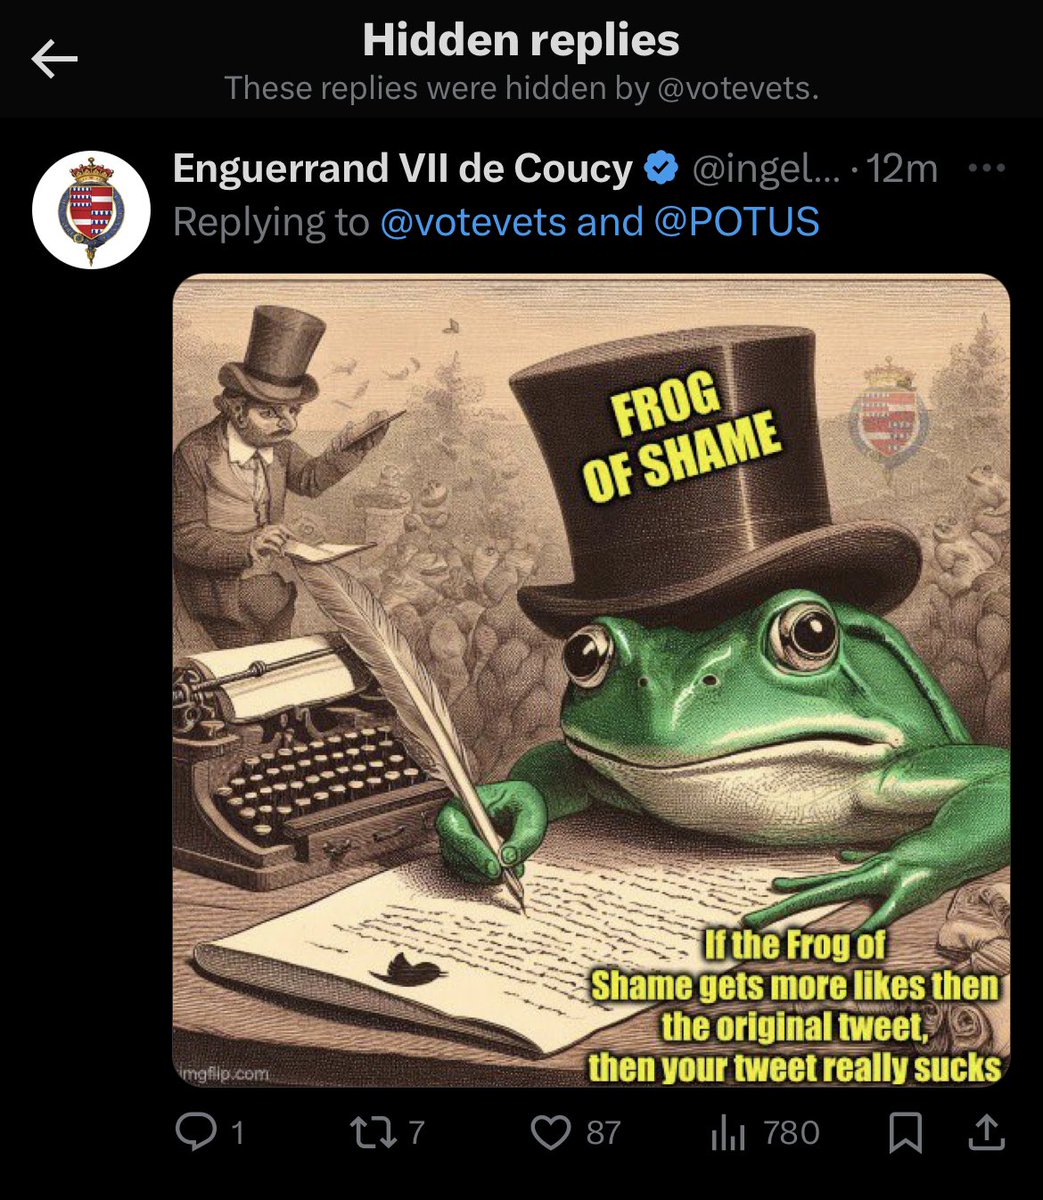 Ladies and gentlemen, VoteVets has hidden The Frog! He needs your help to beat them, he’ll get few residual likes from people happening in the thread. Every bit helps!! Technically this is a tacit admission of defeat, but with a take this bad outright victory is needed!